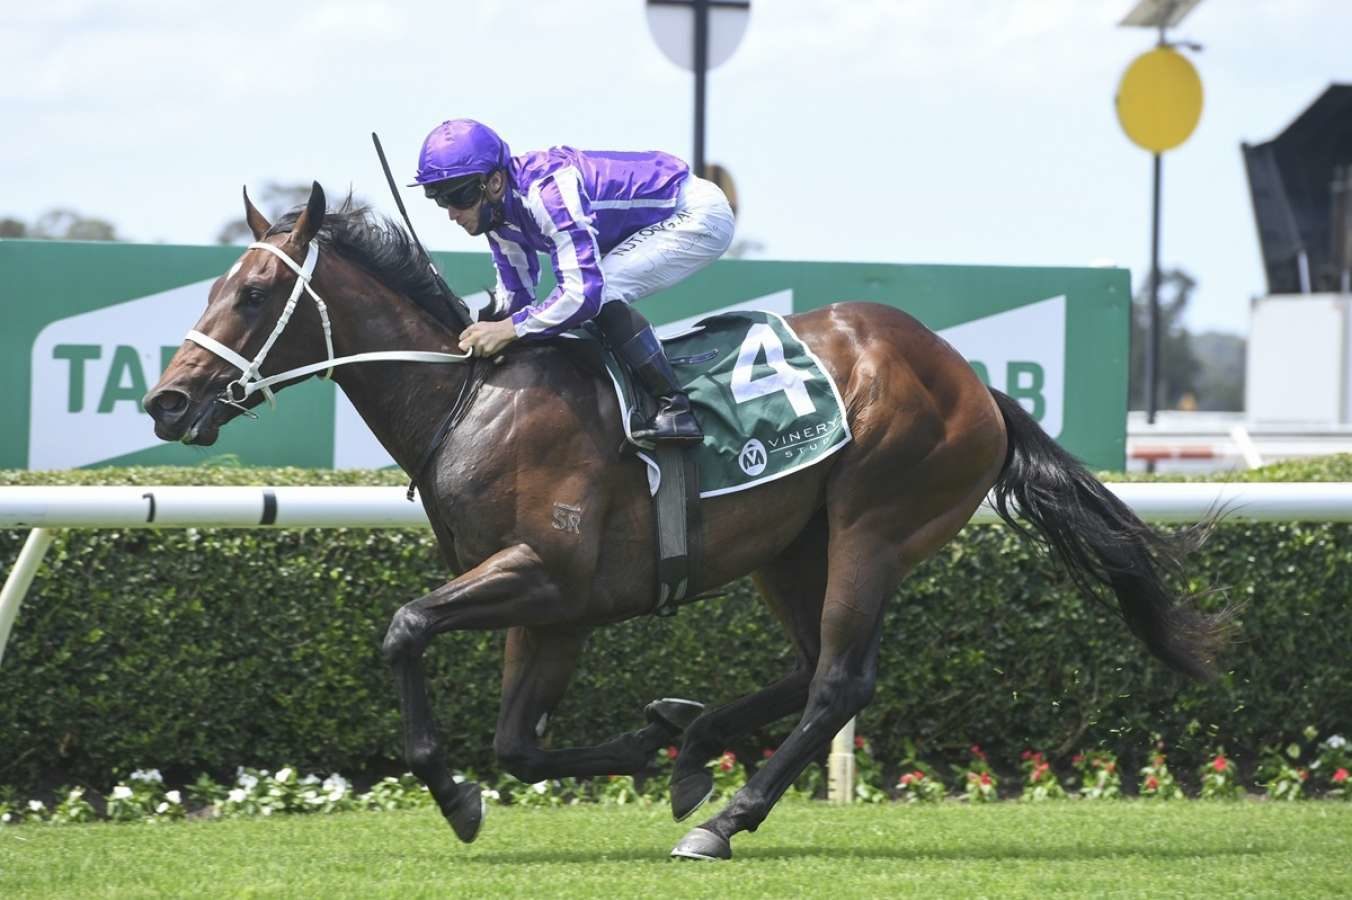 Ranch hand impressed on debut at warwick farm 1608708779 1352x900